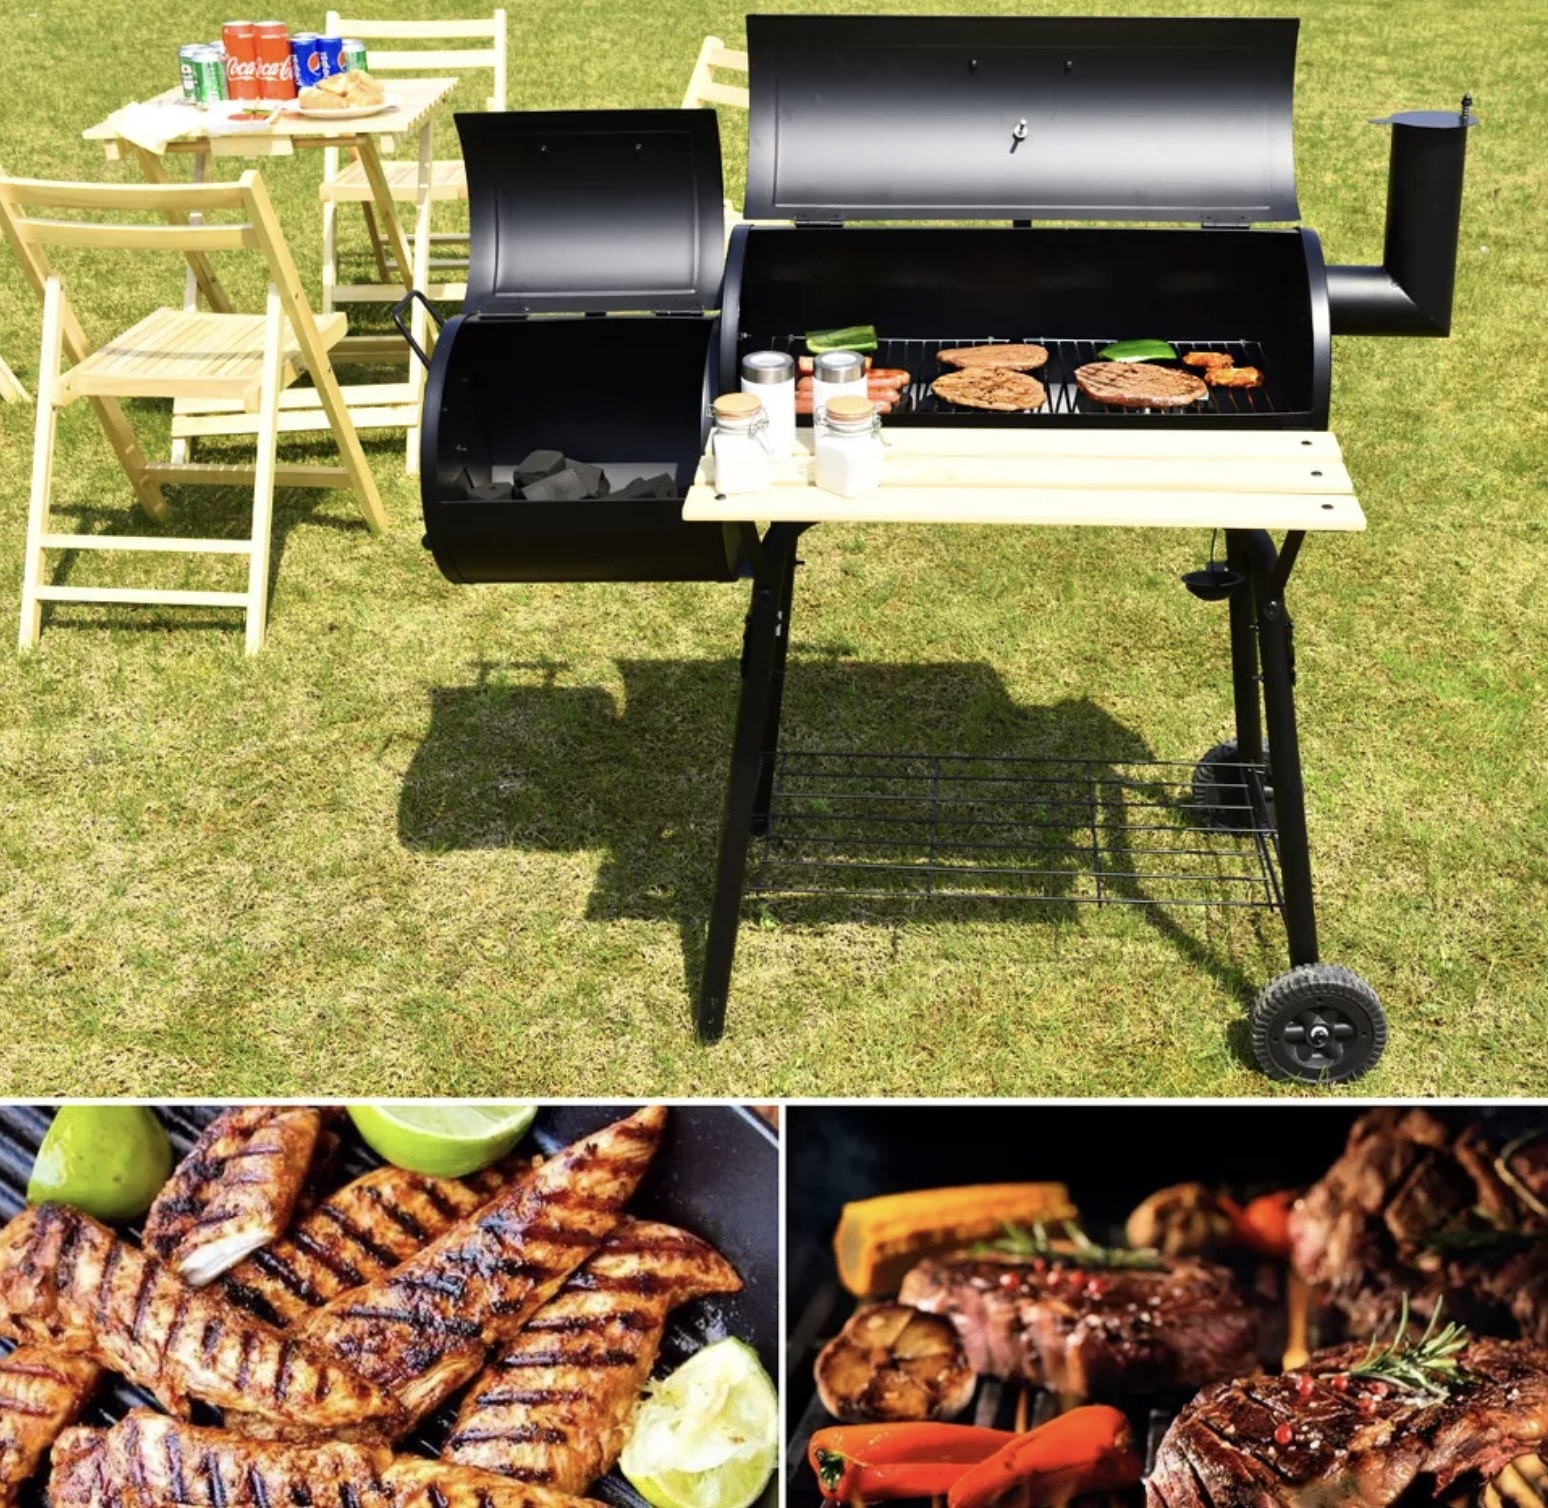 the grill and smoker combination